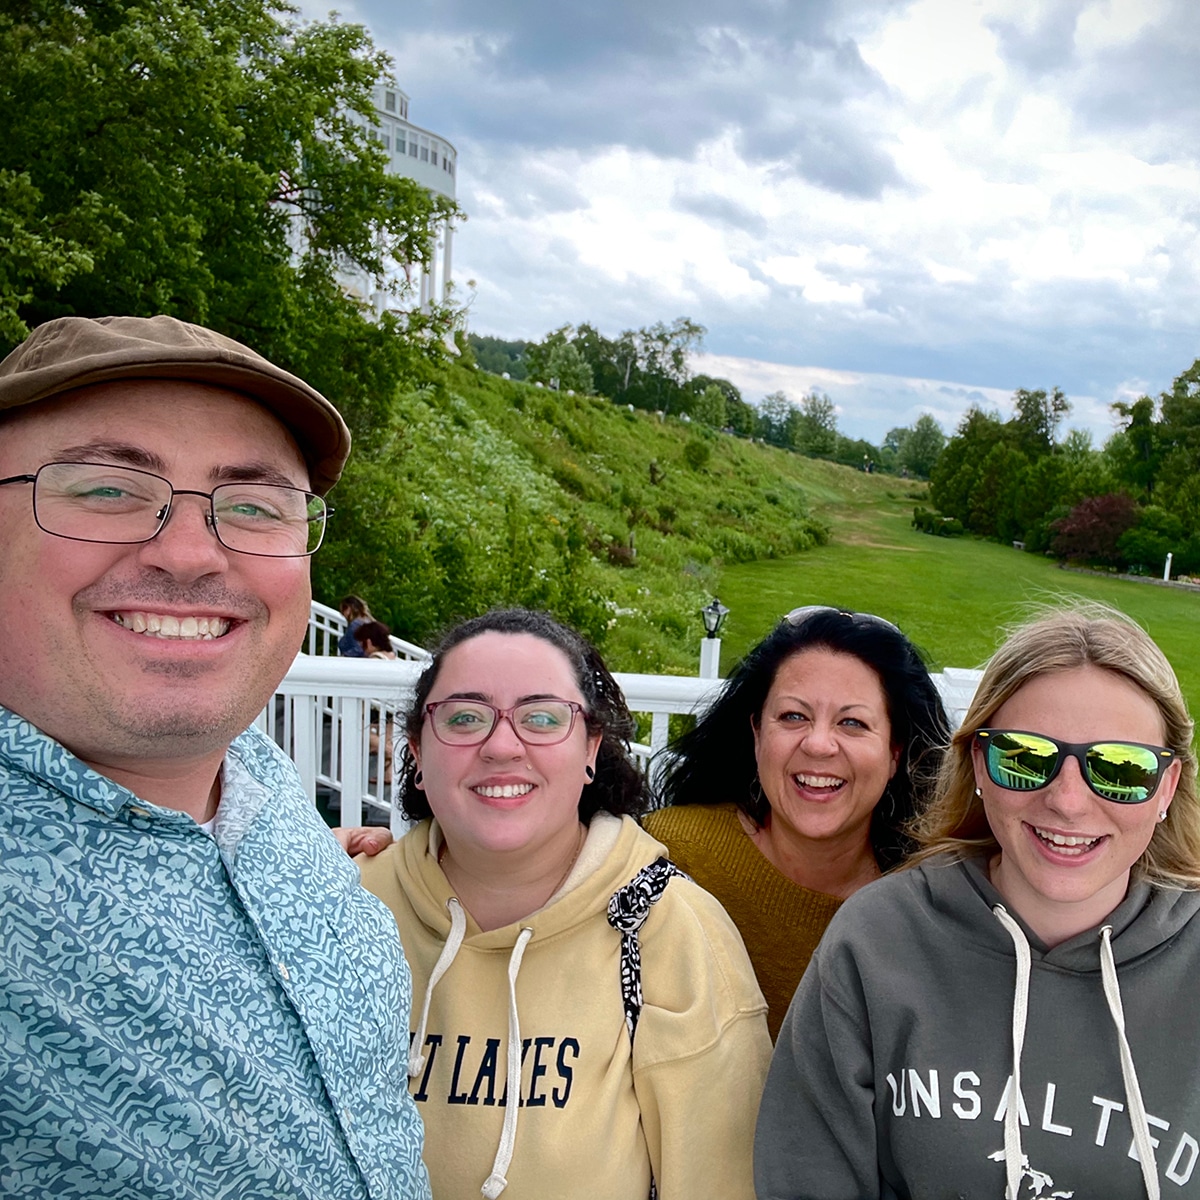 Steve and I with our daughter and niece on the deck of the Grand Hotel on Mackinac Island.